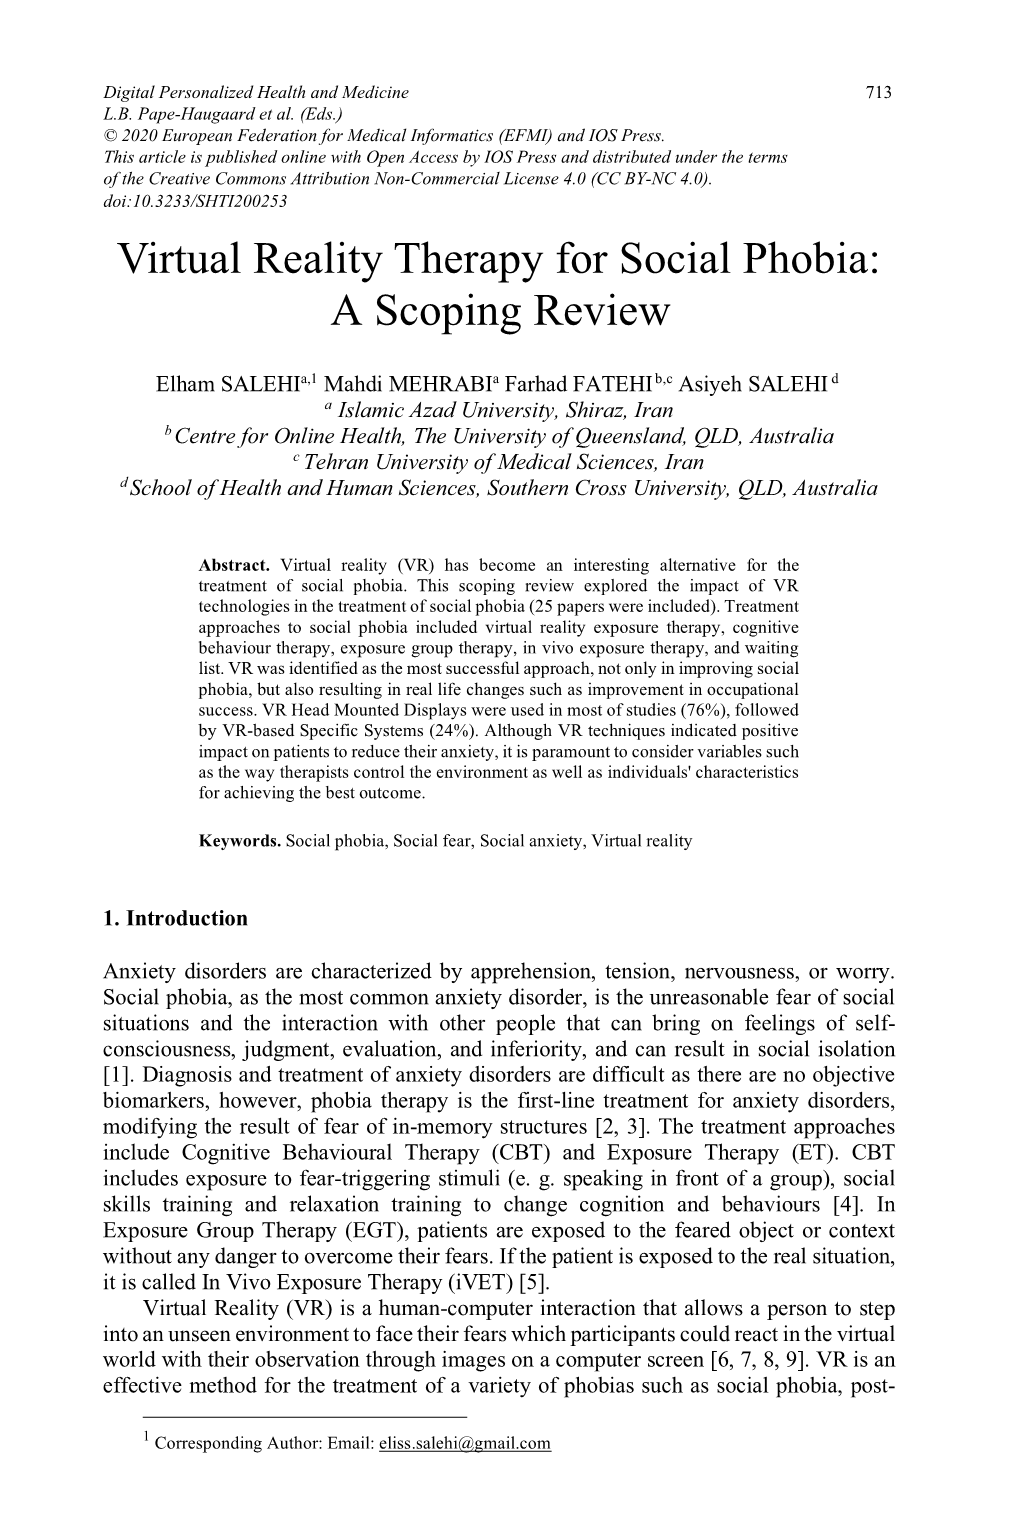 Virtual Reality Therapy for Social Phobia: a Scoping Review